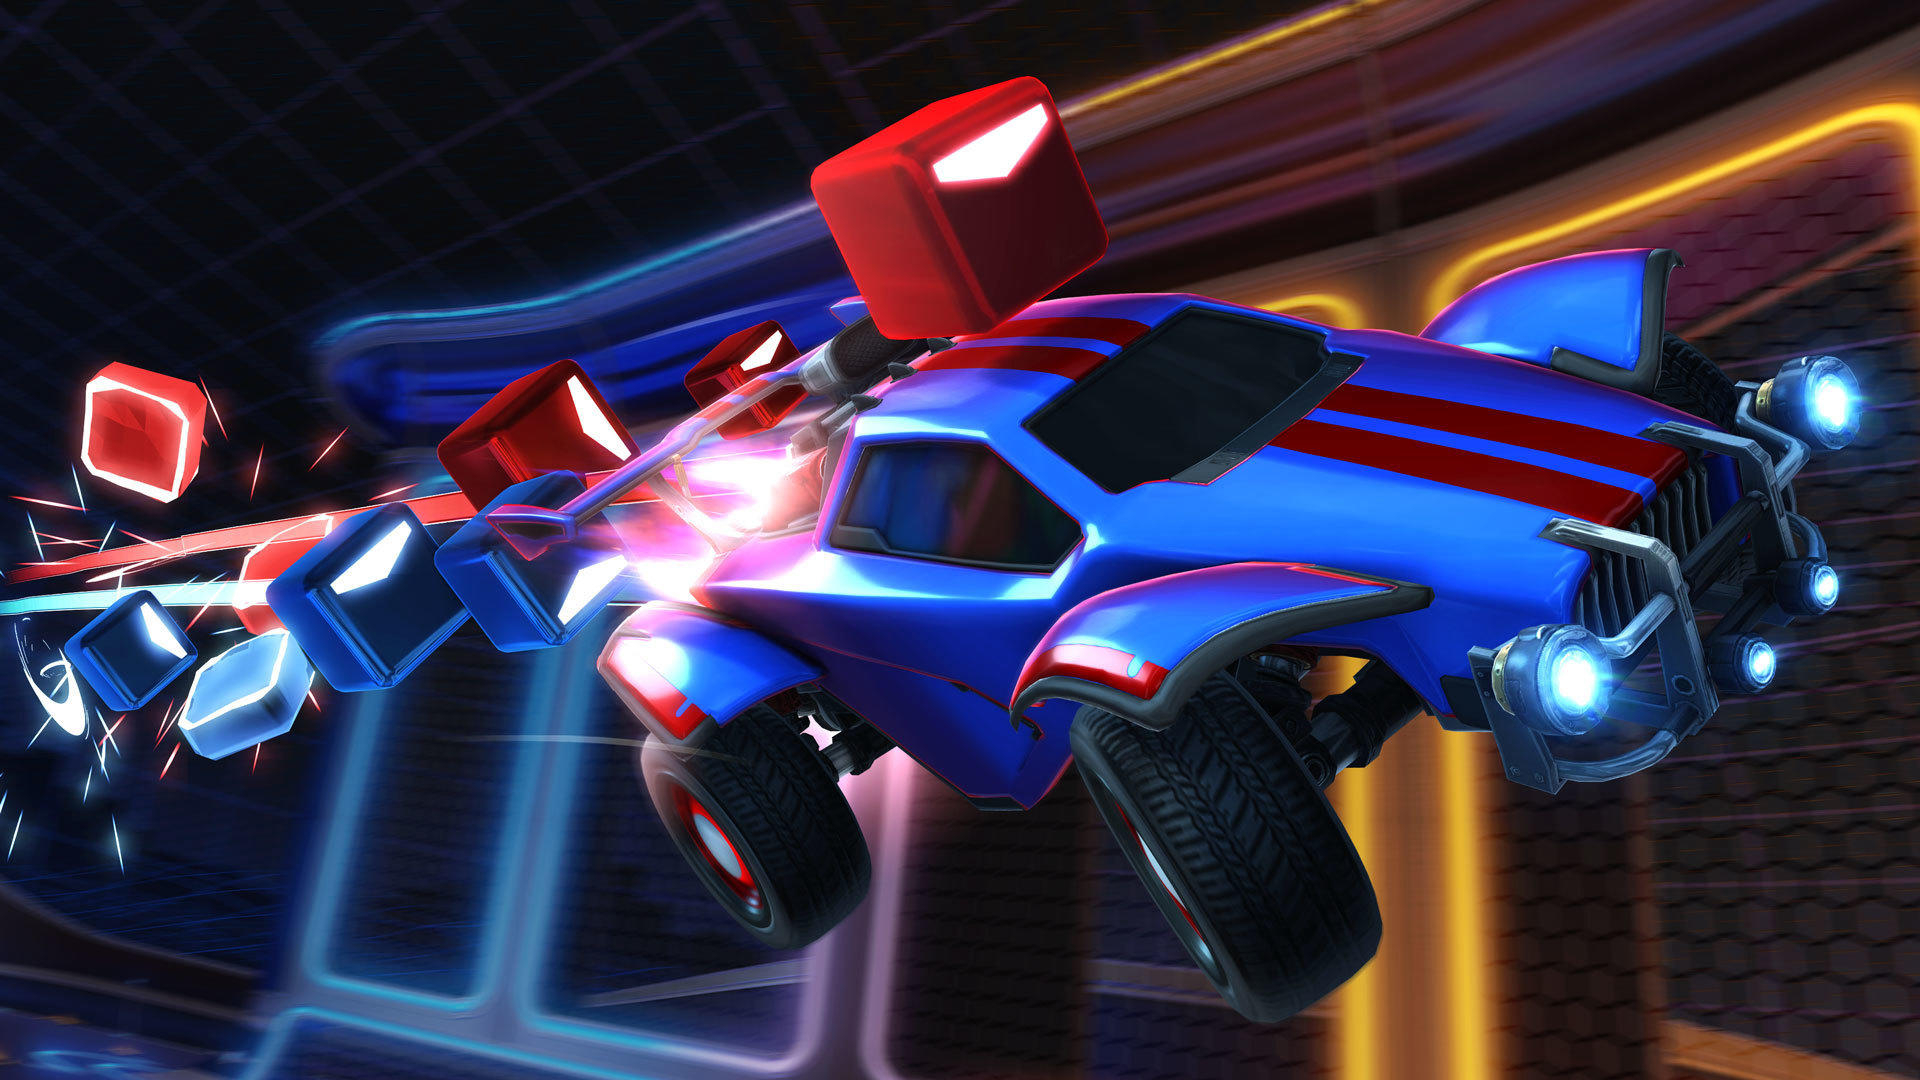 Rocket League Wallpapers High Quality | Download Free